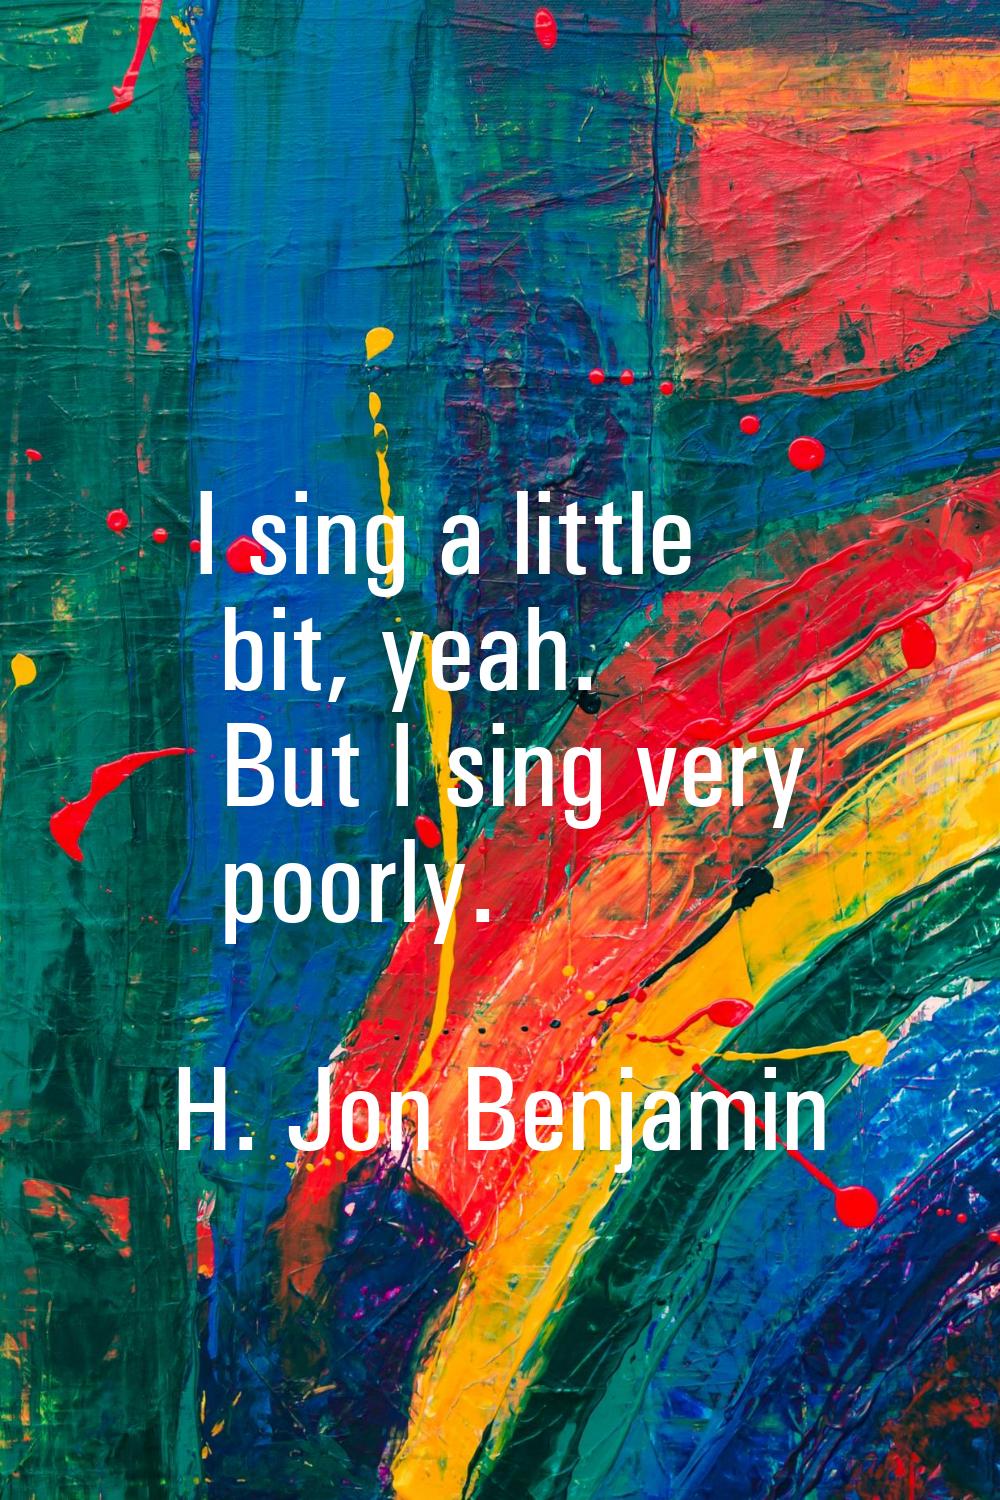 I sing a little bit, yeah. But I sing very poorly.